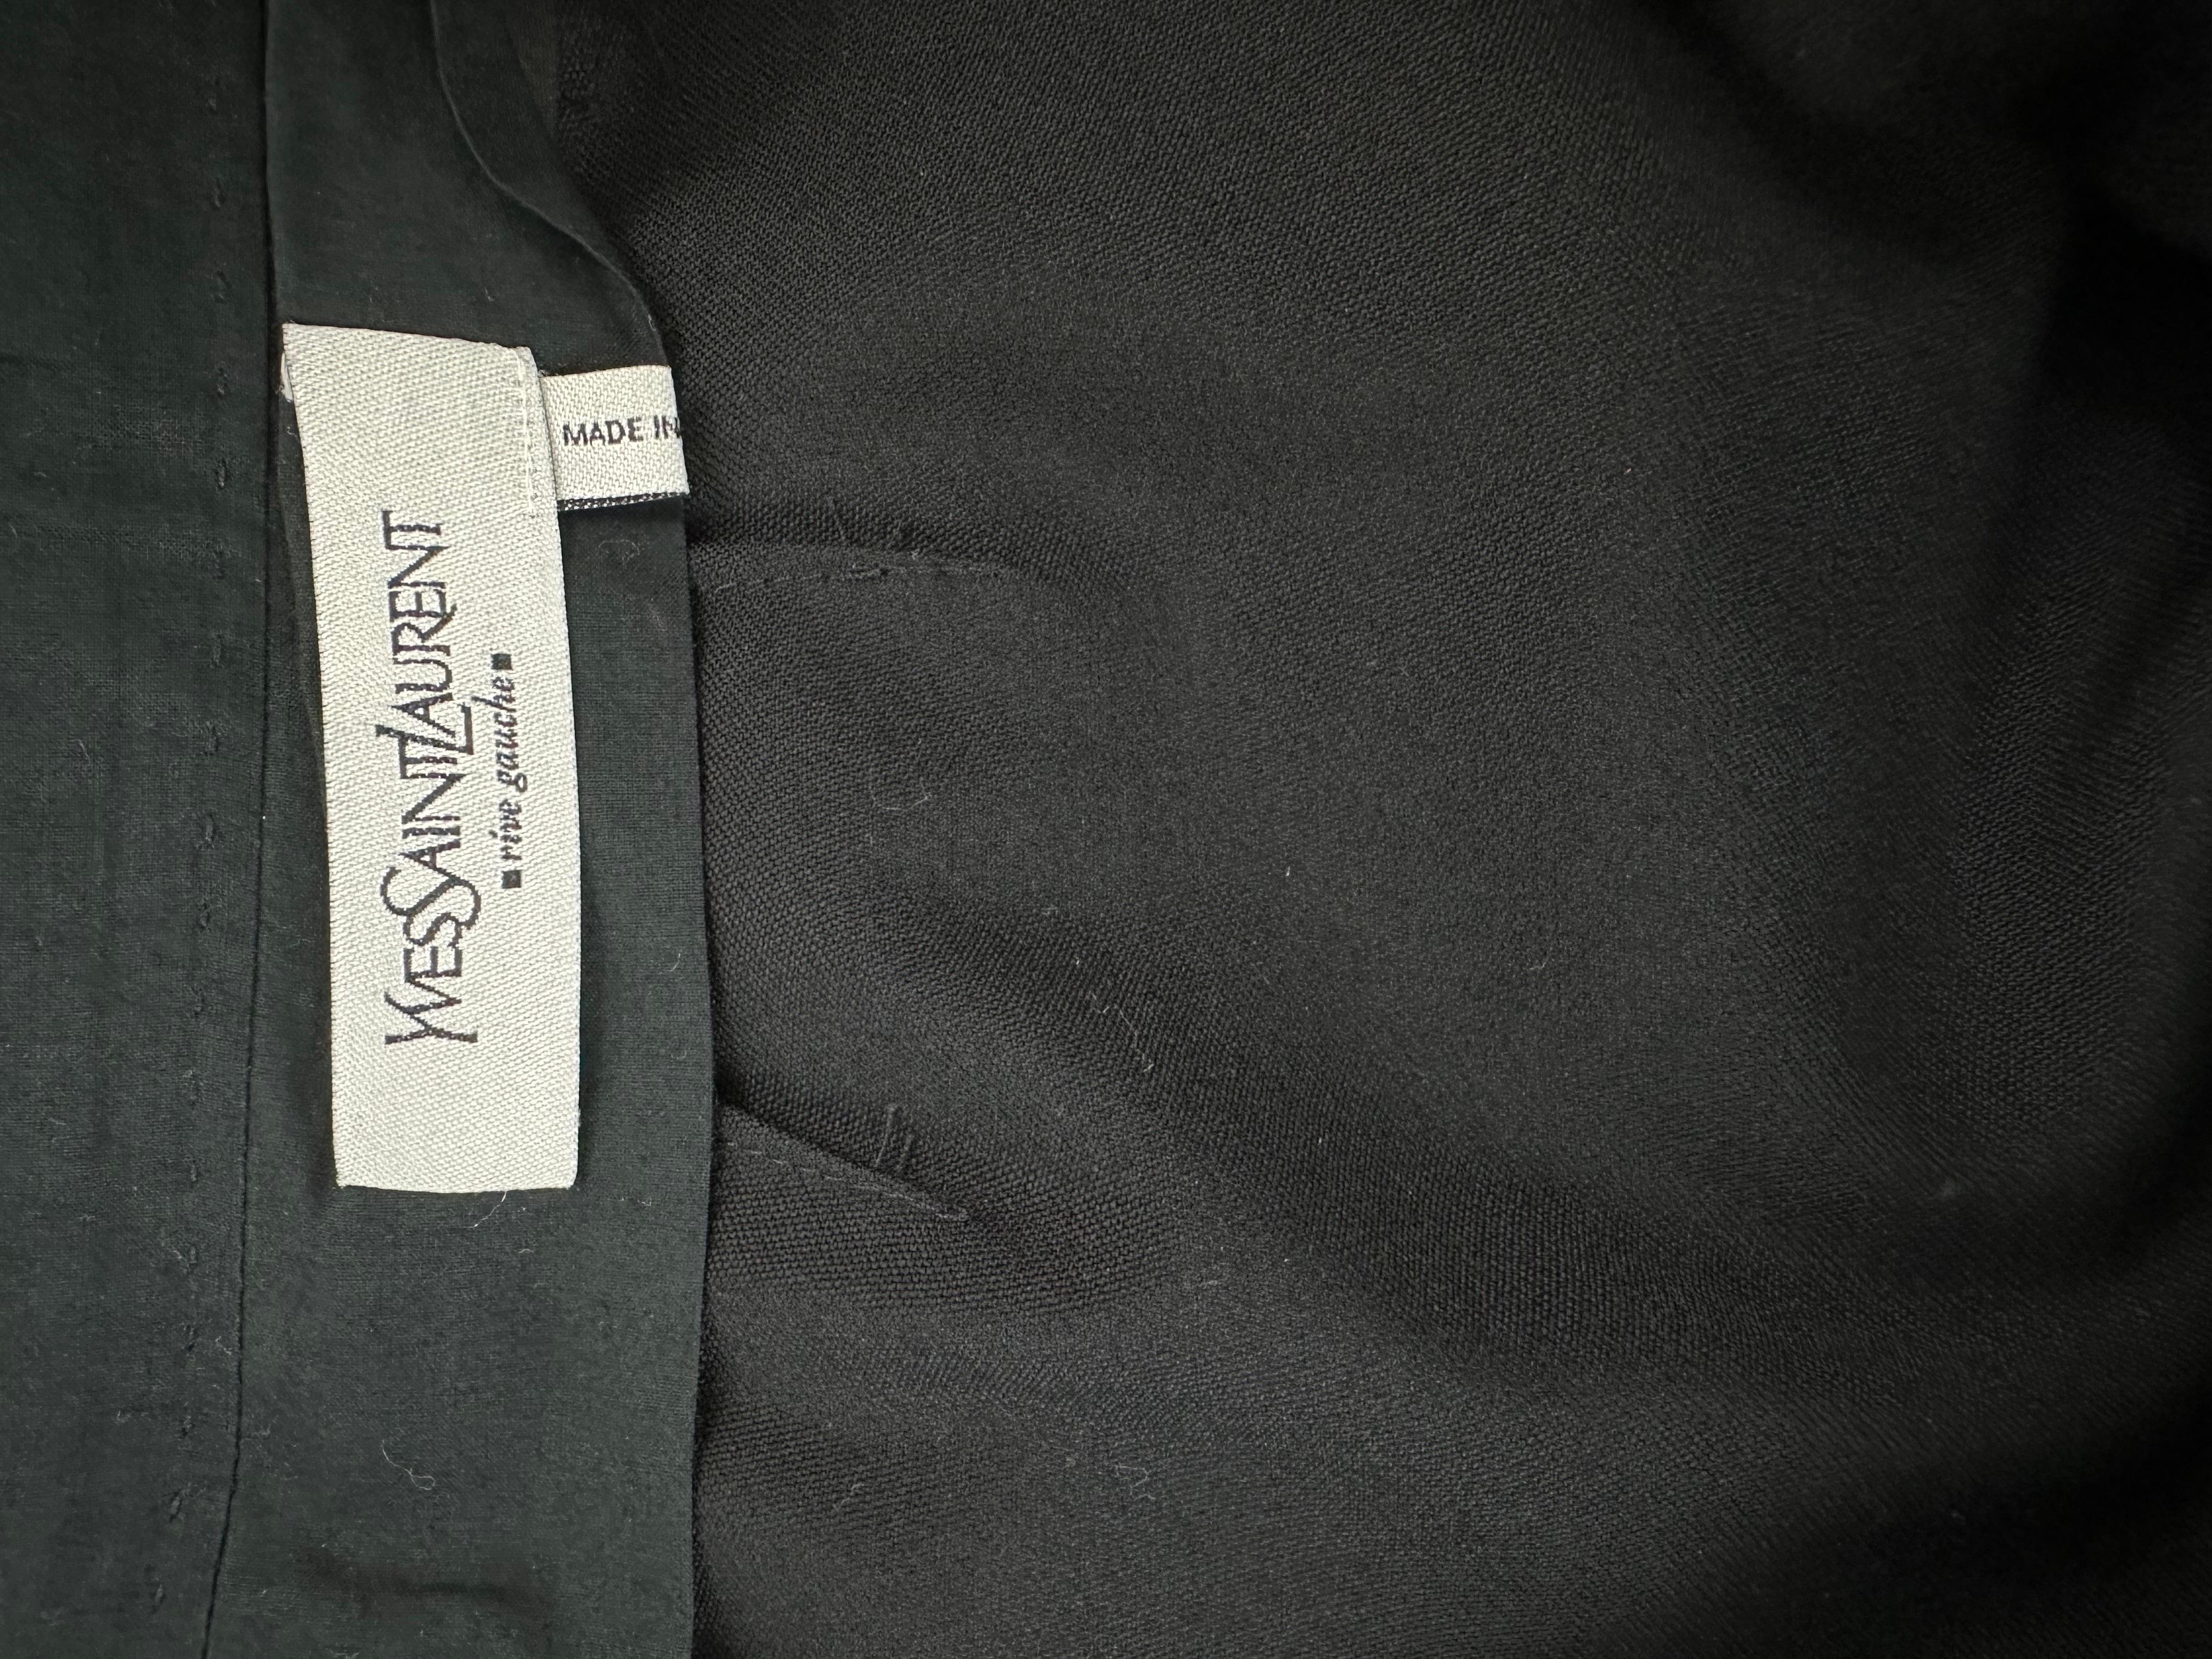 Vintage Ysl pants by Tom Ford in black wool from FW2003 collection For Sale 3